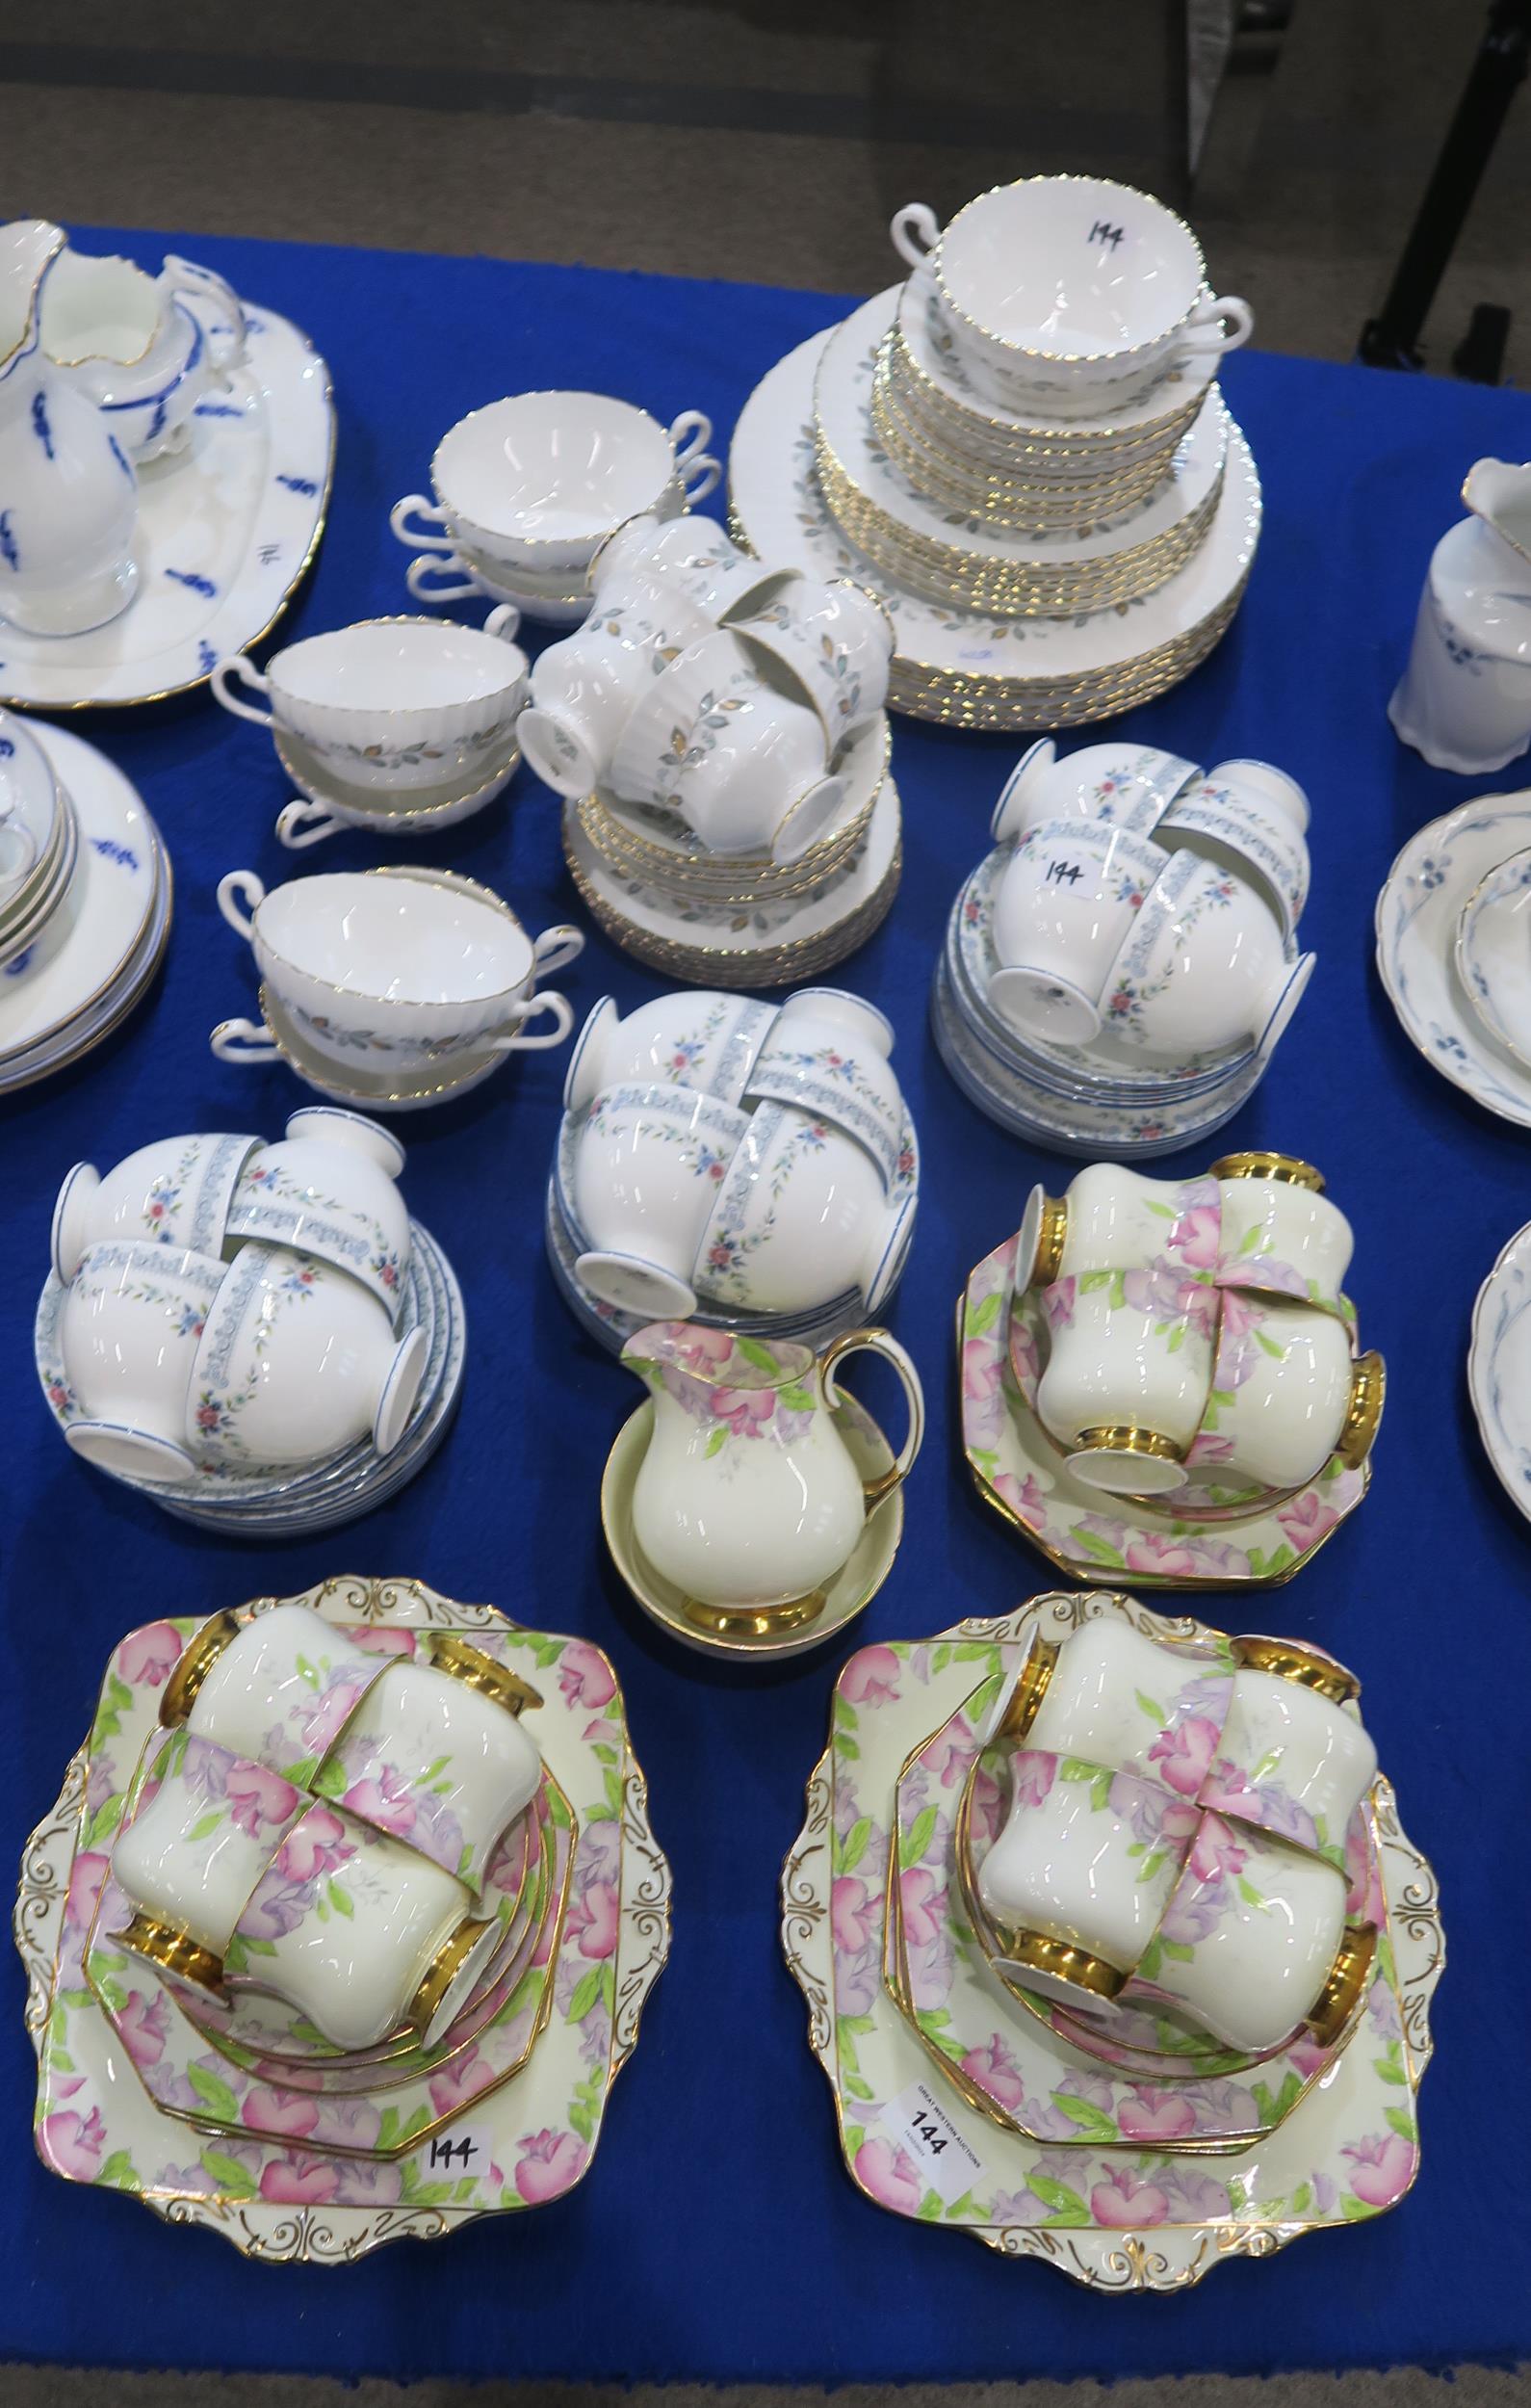 A Paragon Sweet Pea pattern teaset, together with a Wedgwood Rosedale teaset and a Paragon part